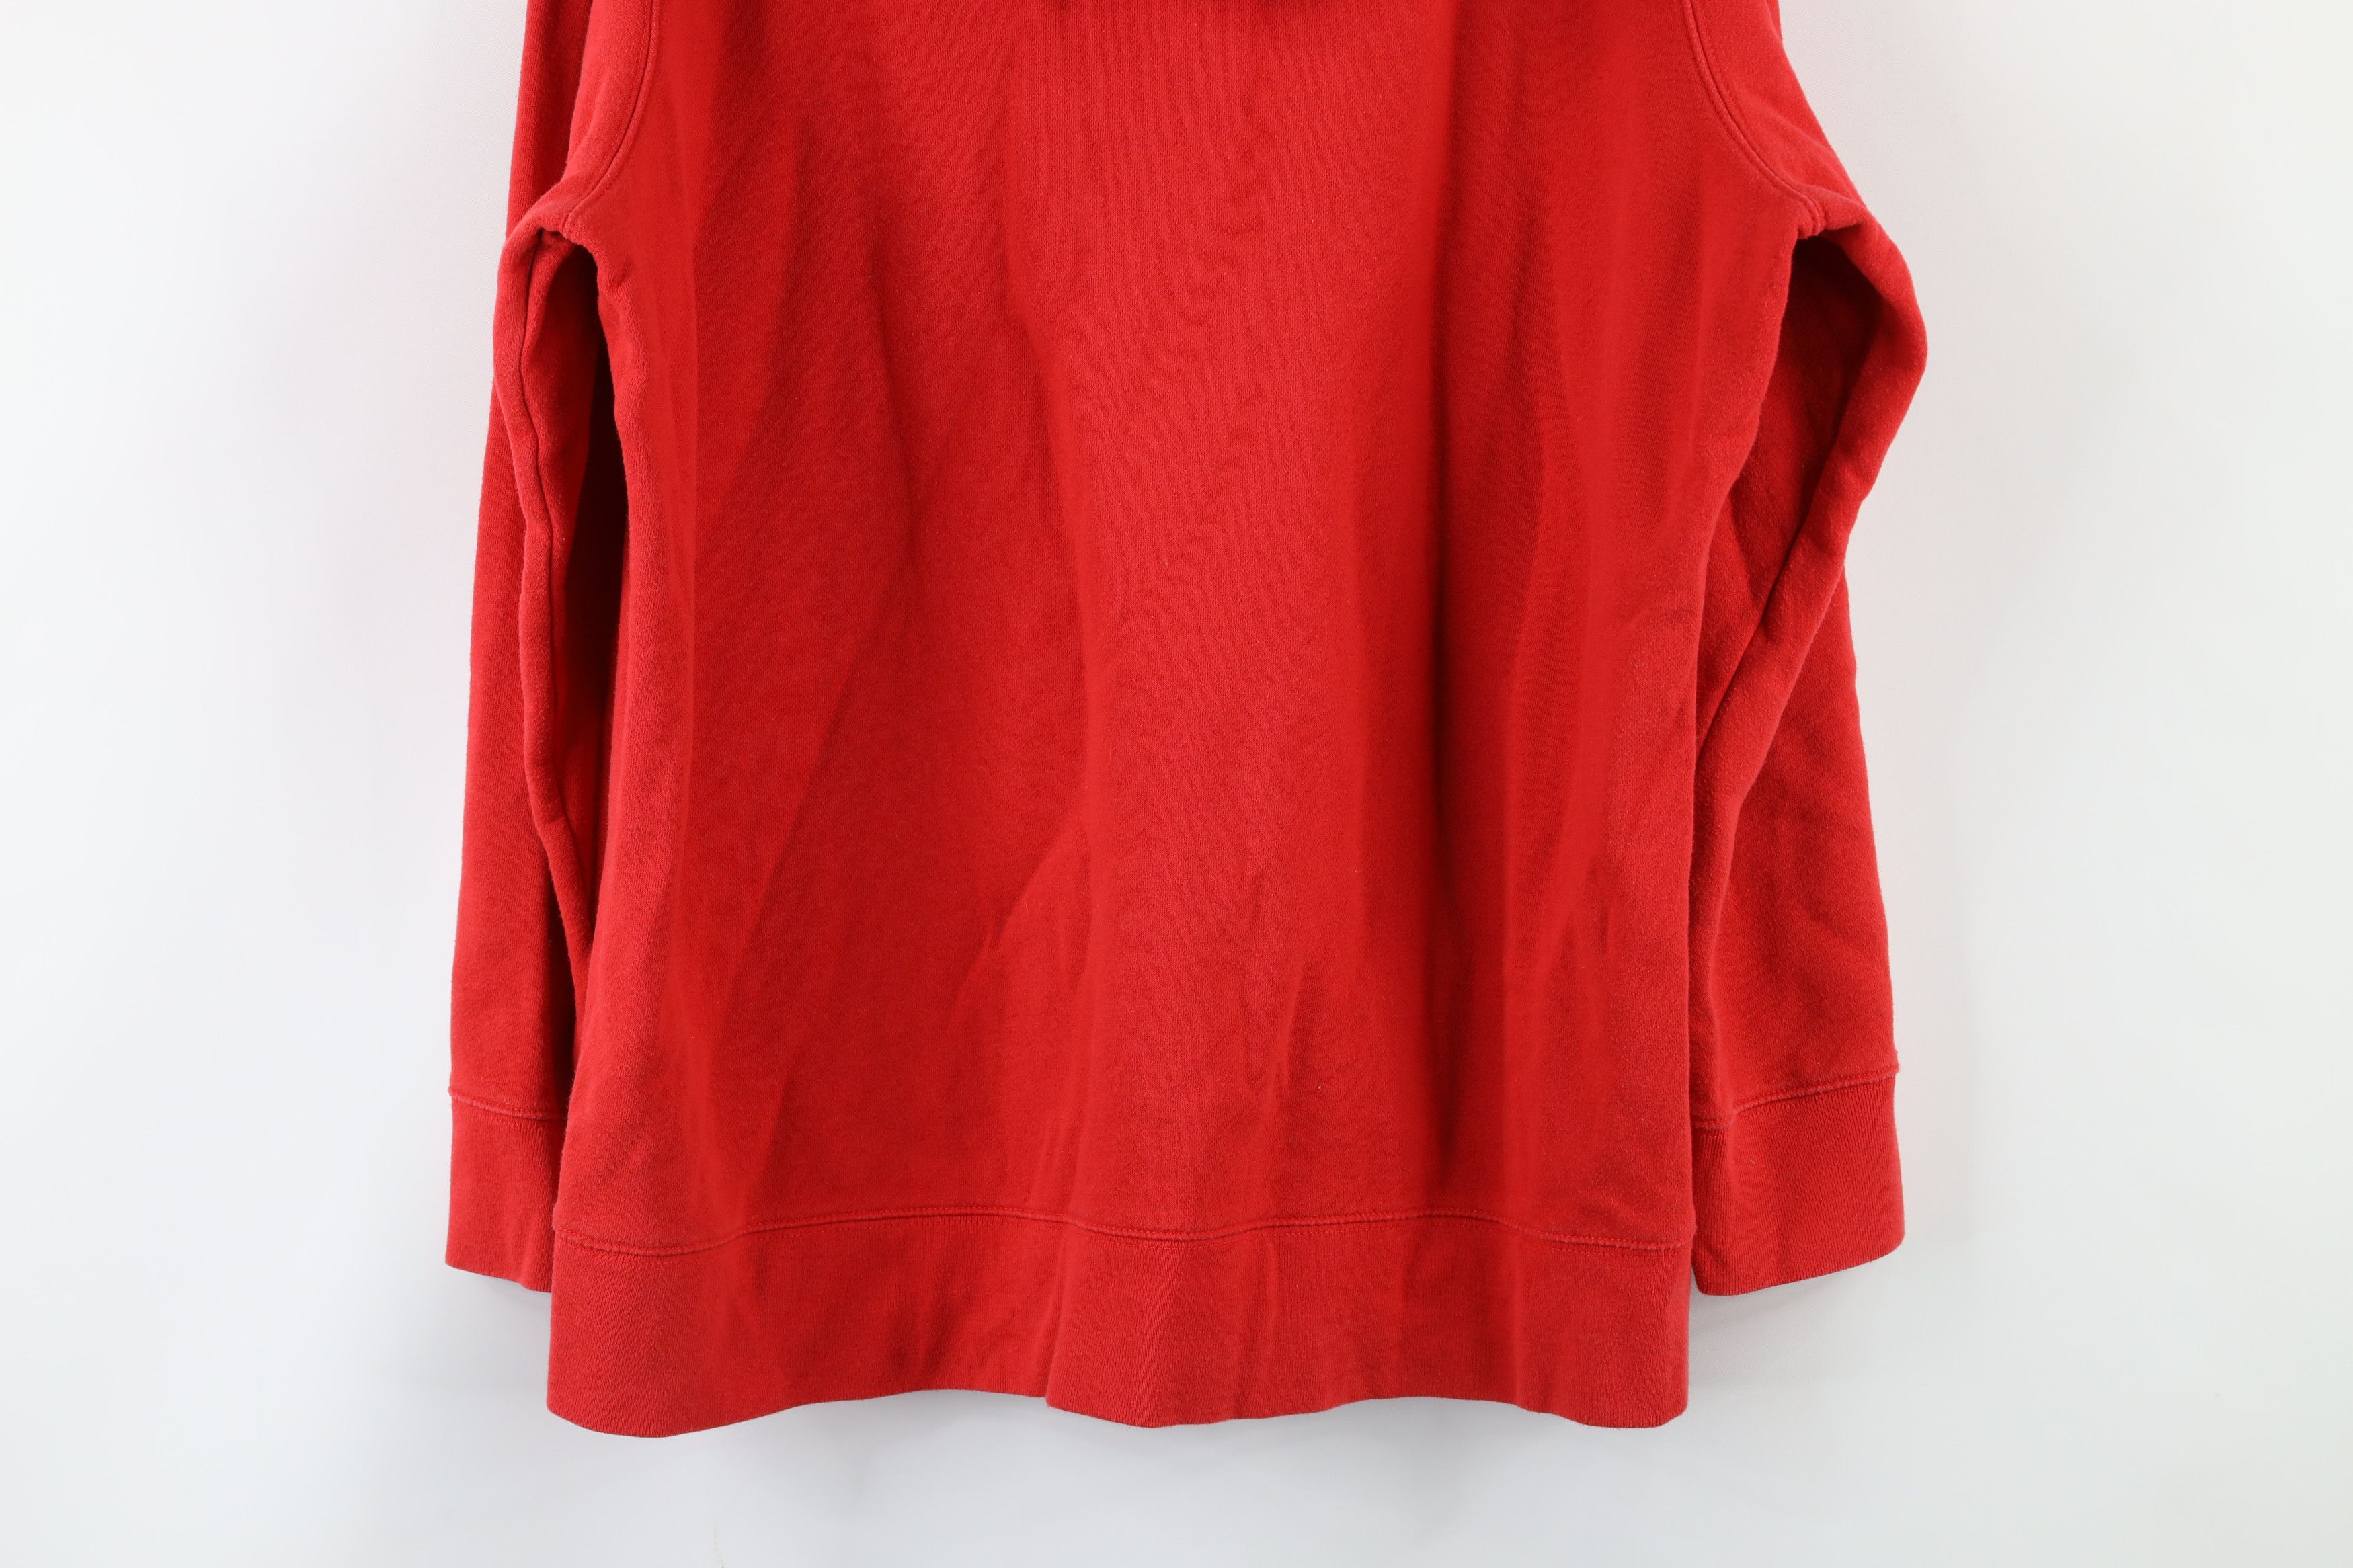 Vintage Vintage Gap Spell Out Block Letter Hoodie Sweatshirt Red Size US XXL / EU 58 / 5 - 8 Preview